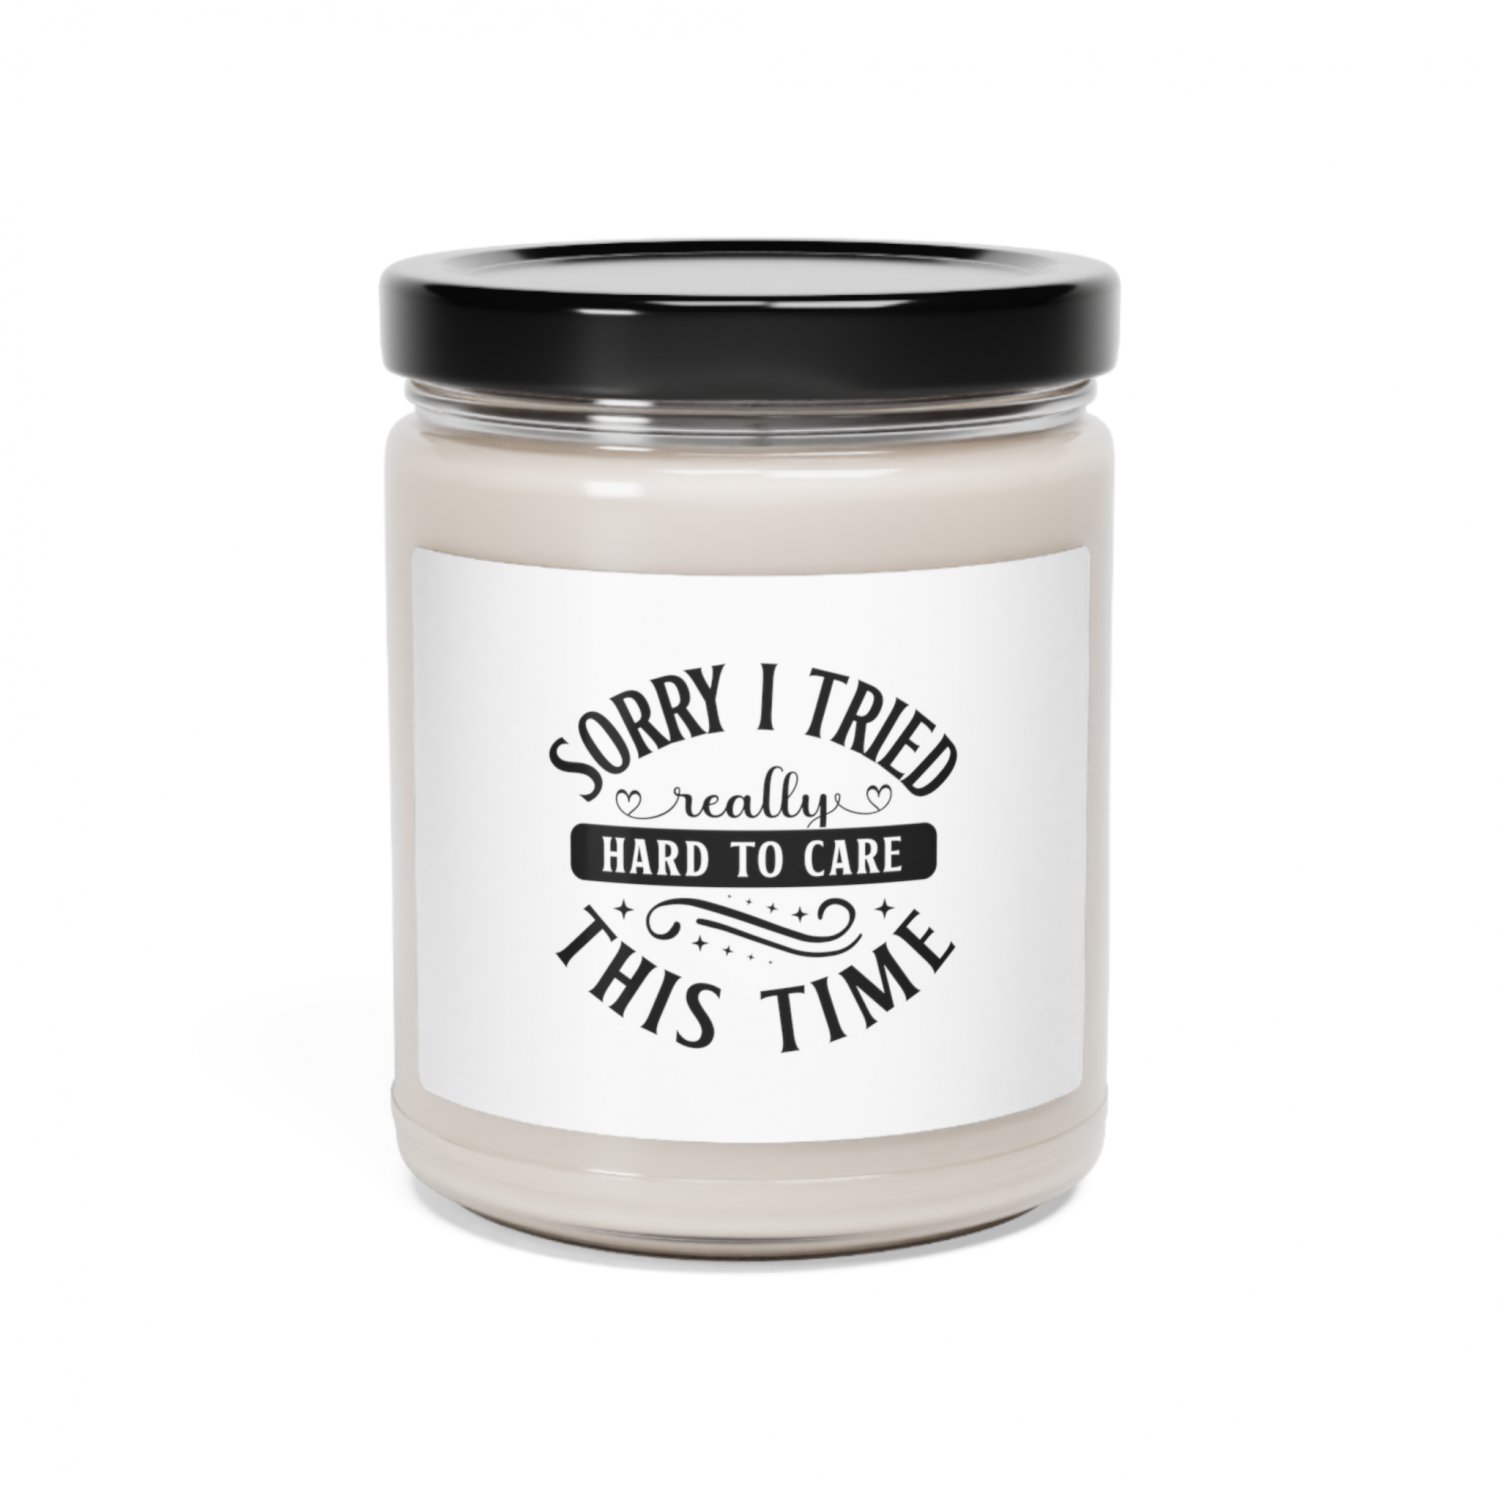 Sorry I Tried Really Hard To Care This Time, Scented Soy Candle, 9oz CLEAN COTTON